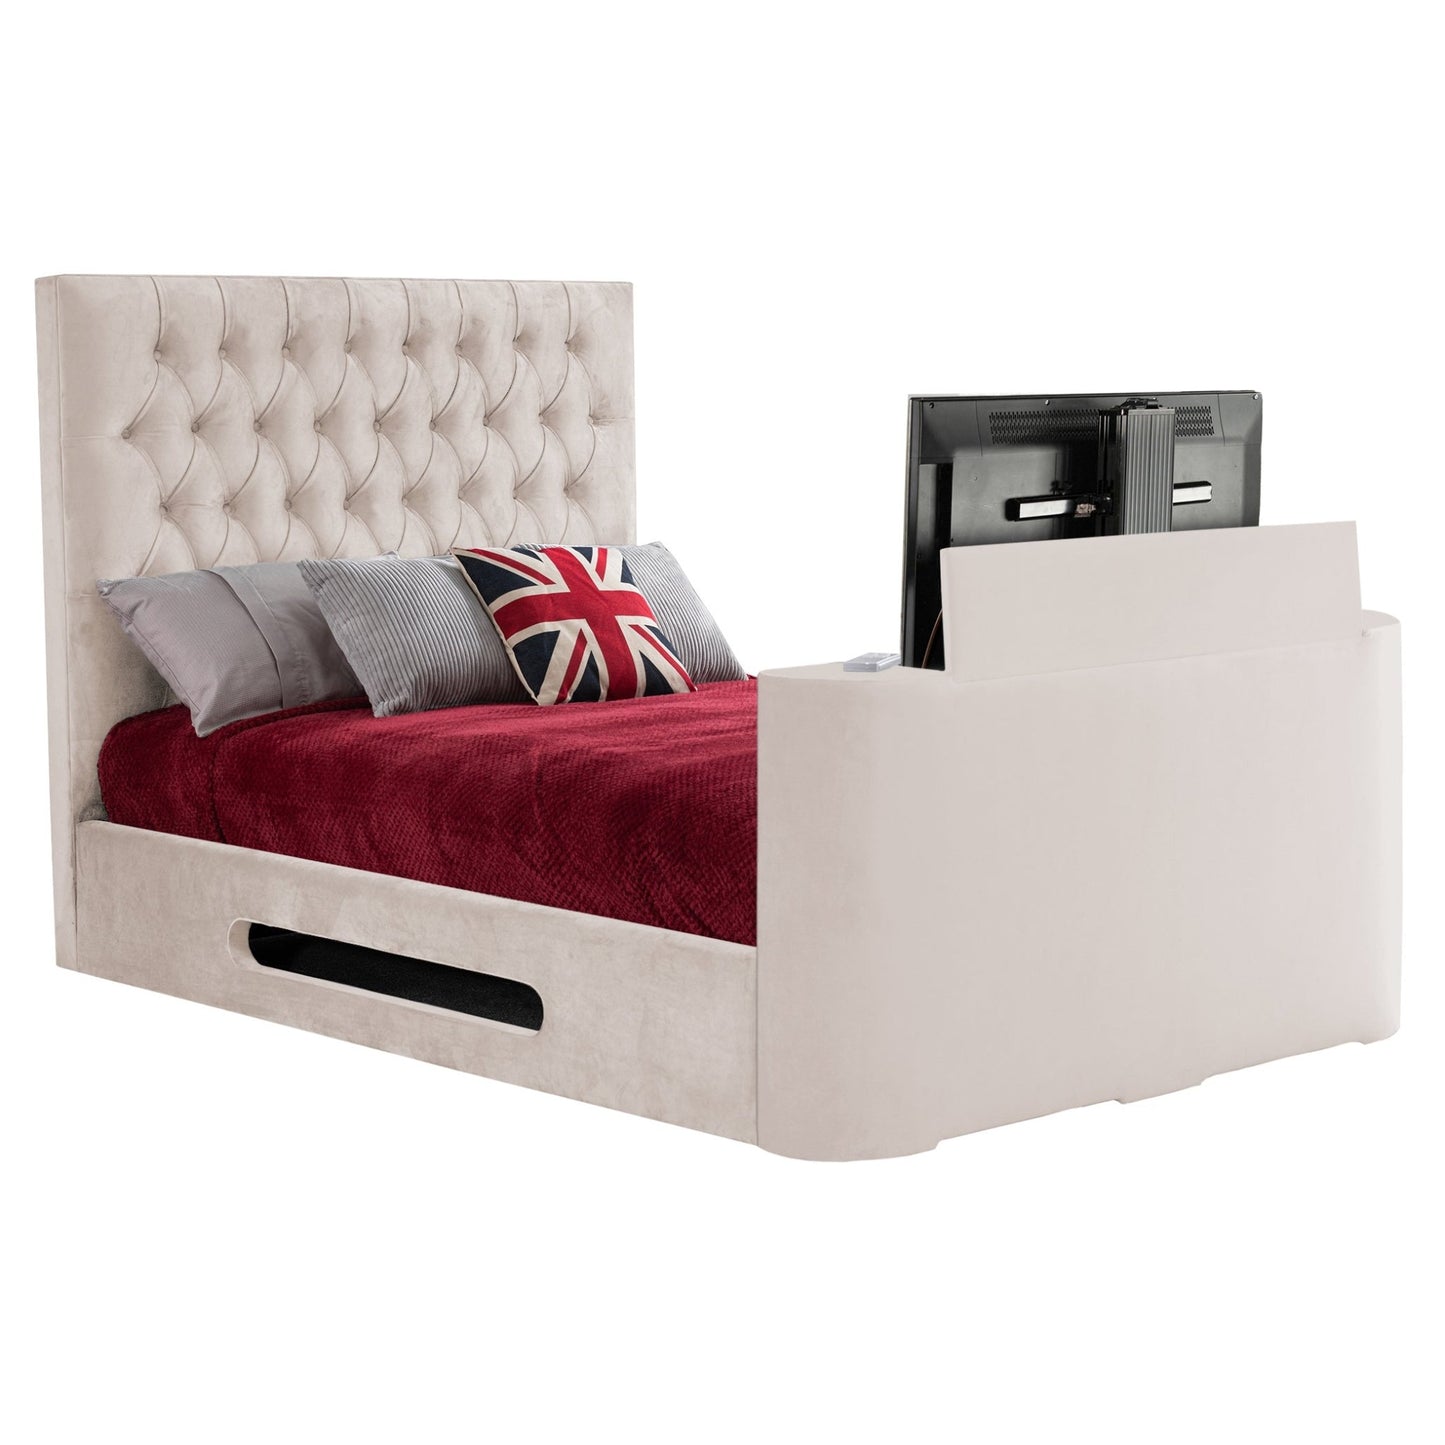 Loren Fabric TV Bed Frame - Sweet Dreams - TV Beds Northwest - SWDLORTVB - choose your colour tvbed - doubletvbed